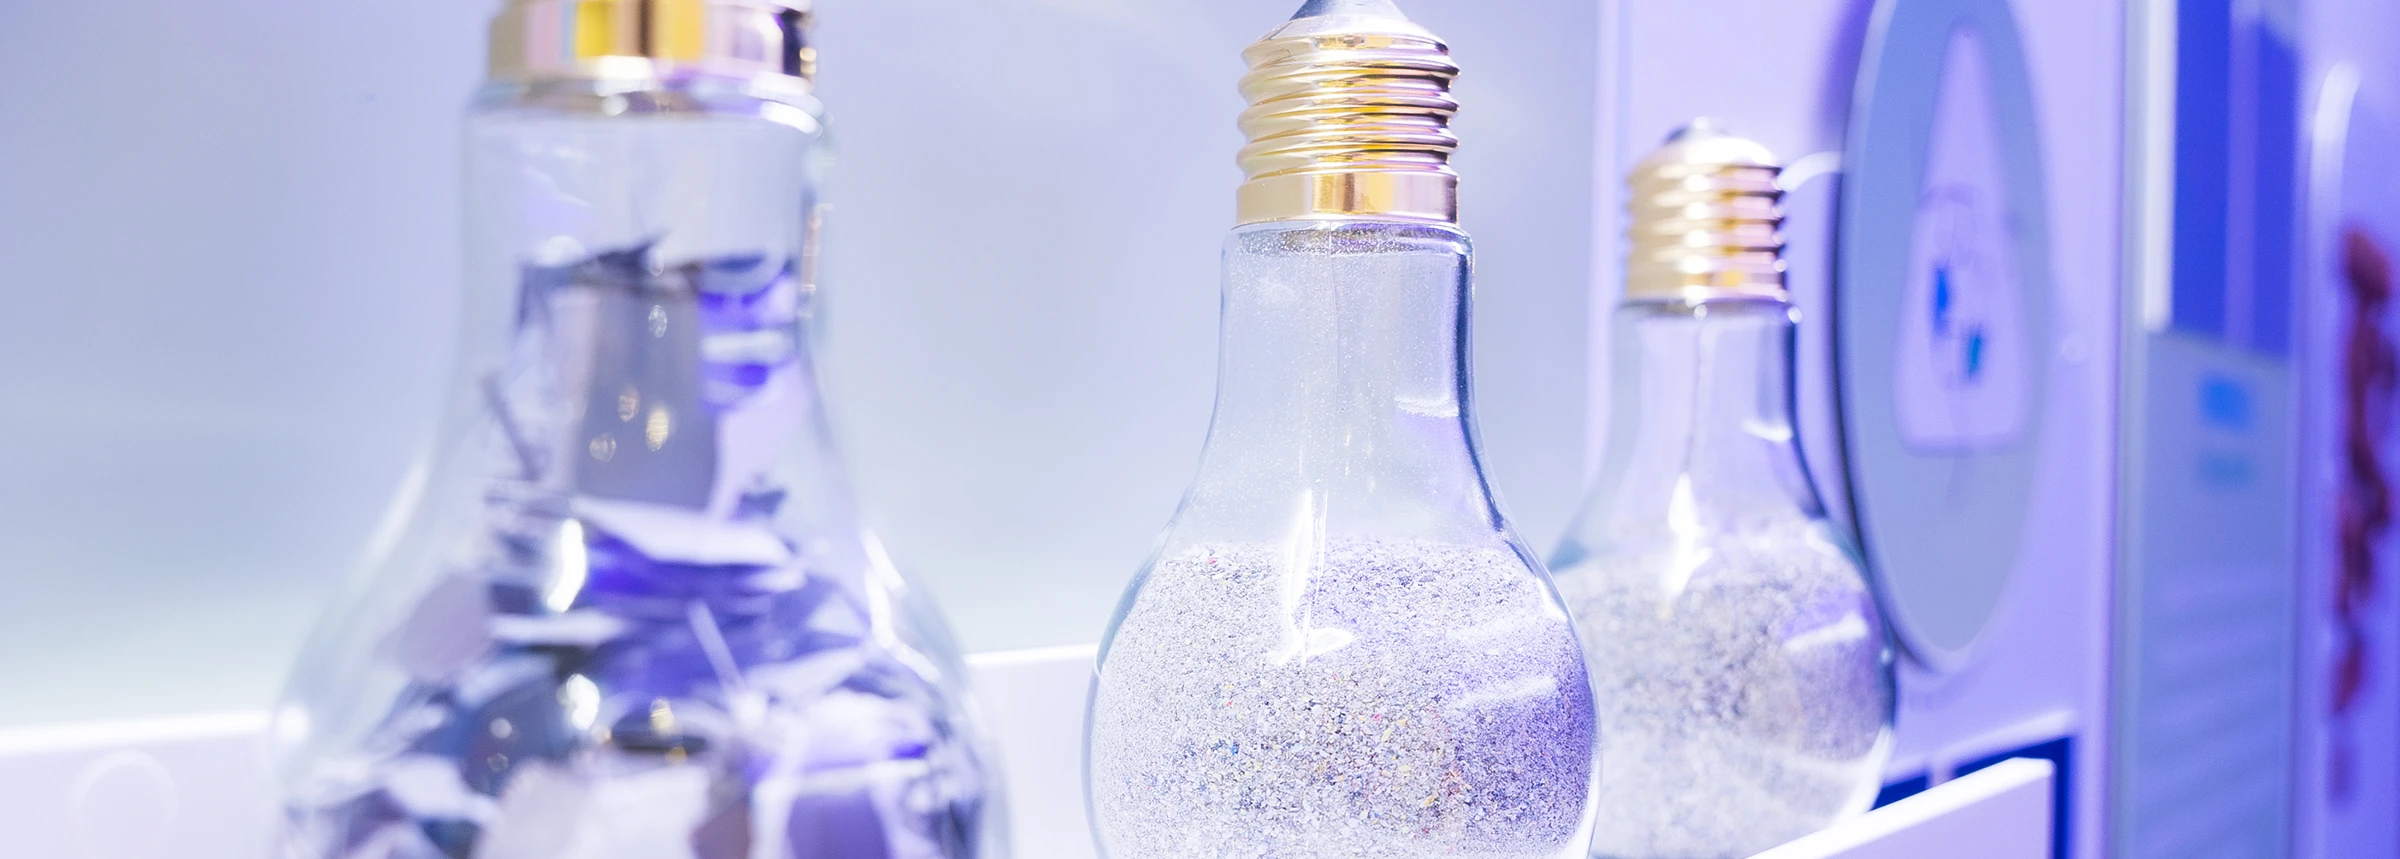 detailed-view-of-three-lightbulbs-filled-with-recycled-material